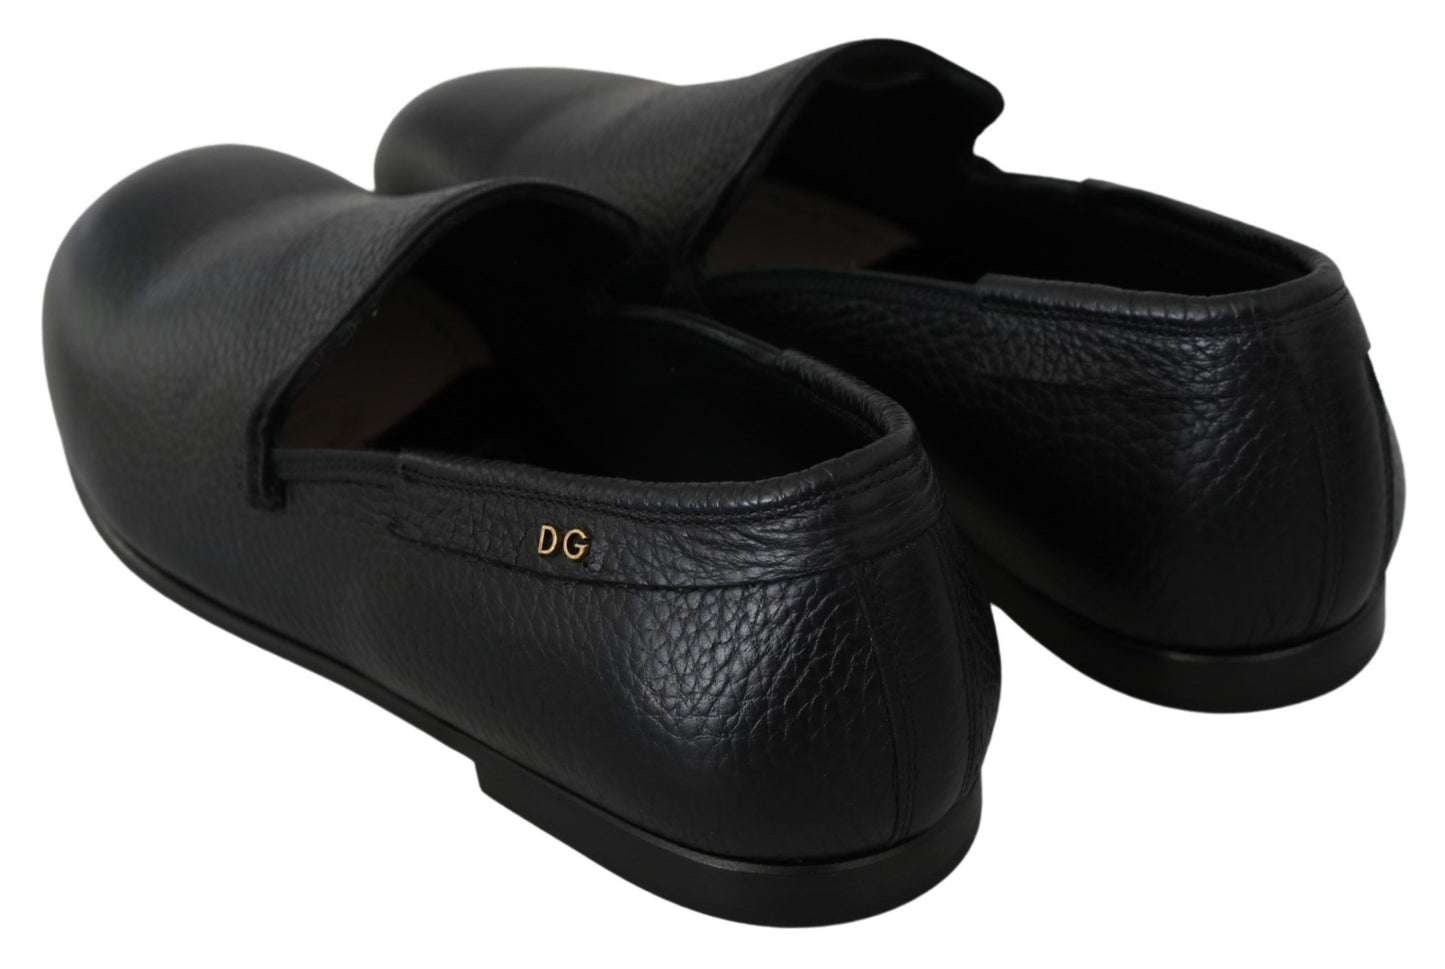 Elegant Black Leather Classic Loafers